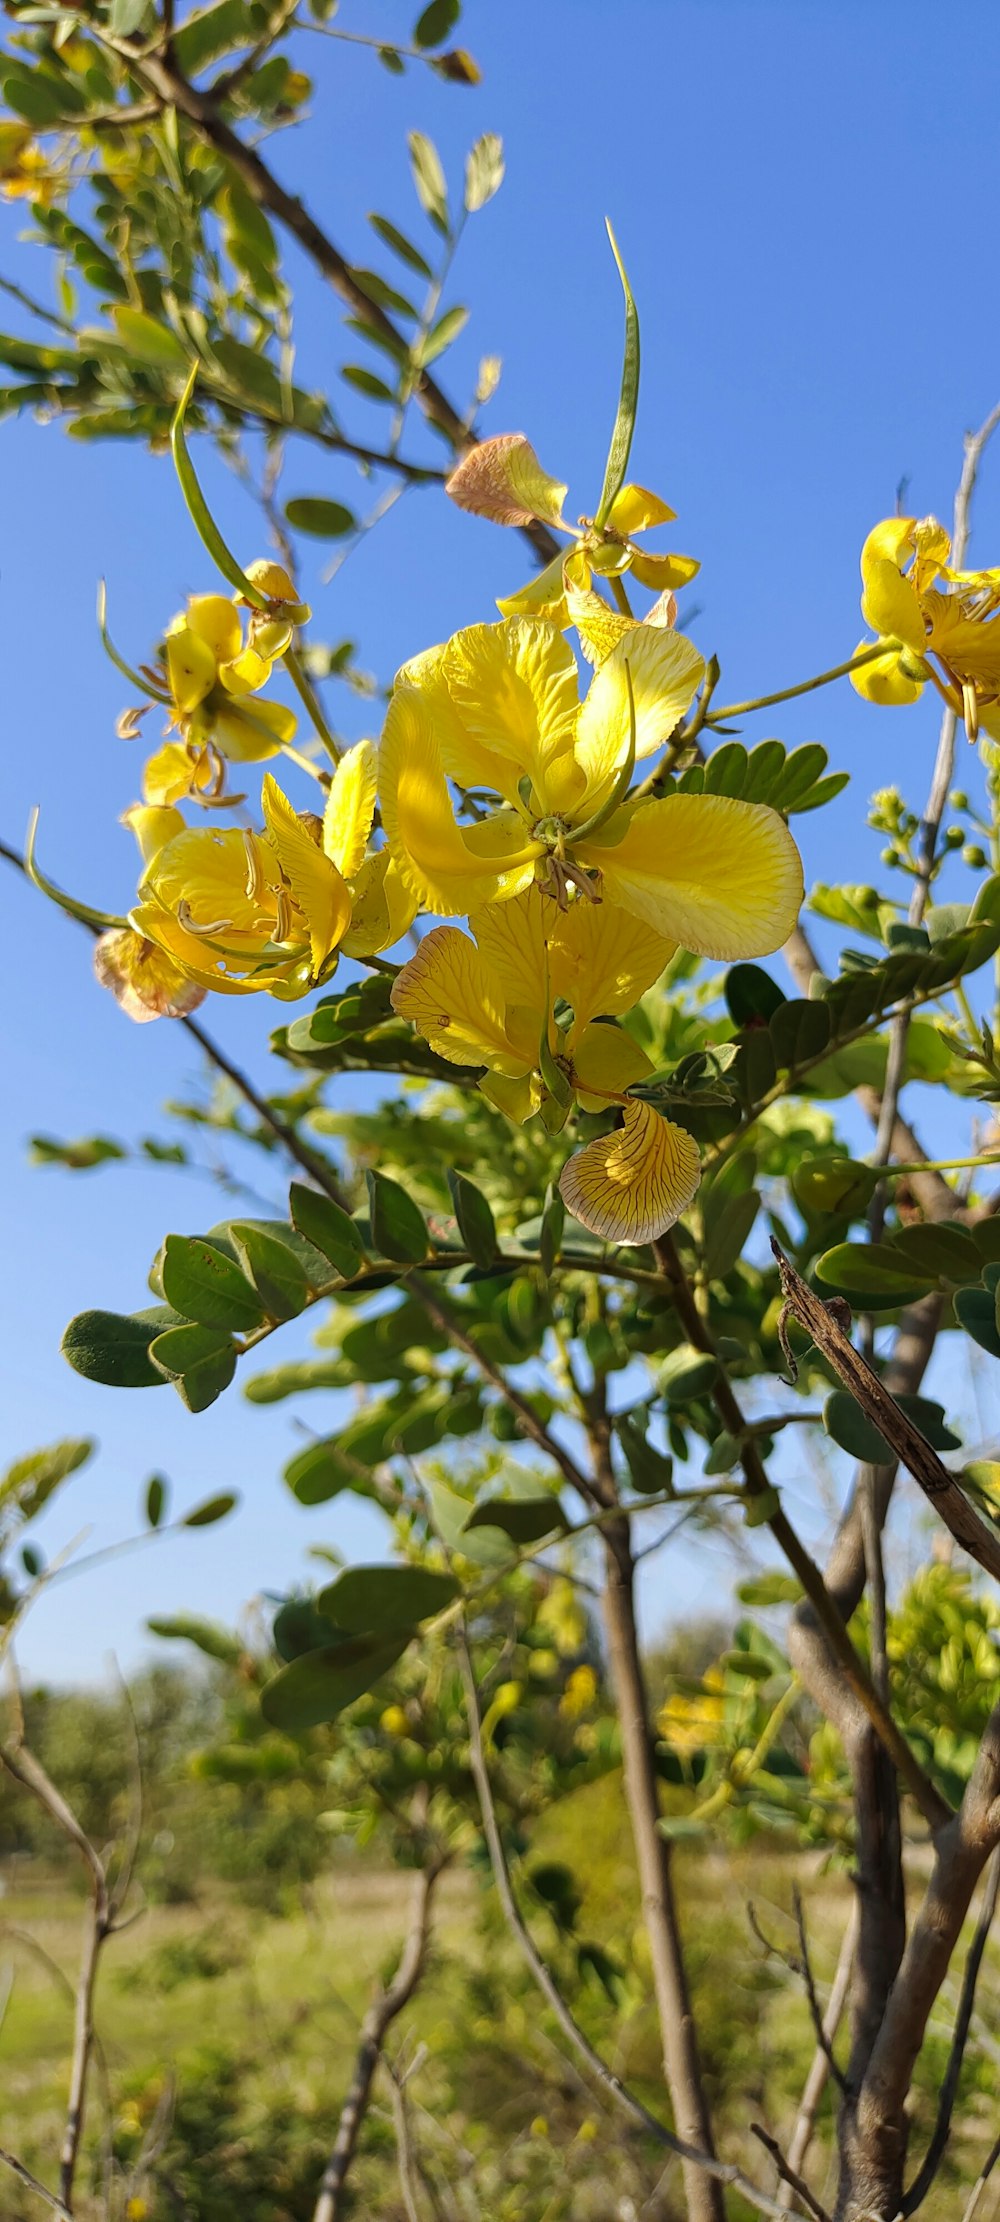 a yellow flower on a tree branch with a blue sky in the background